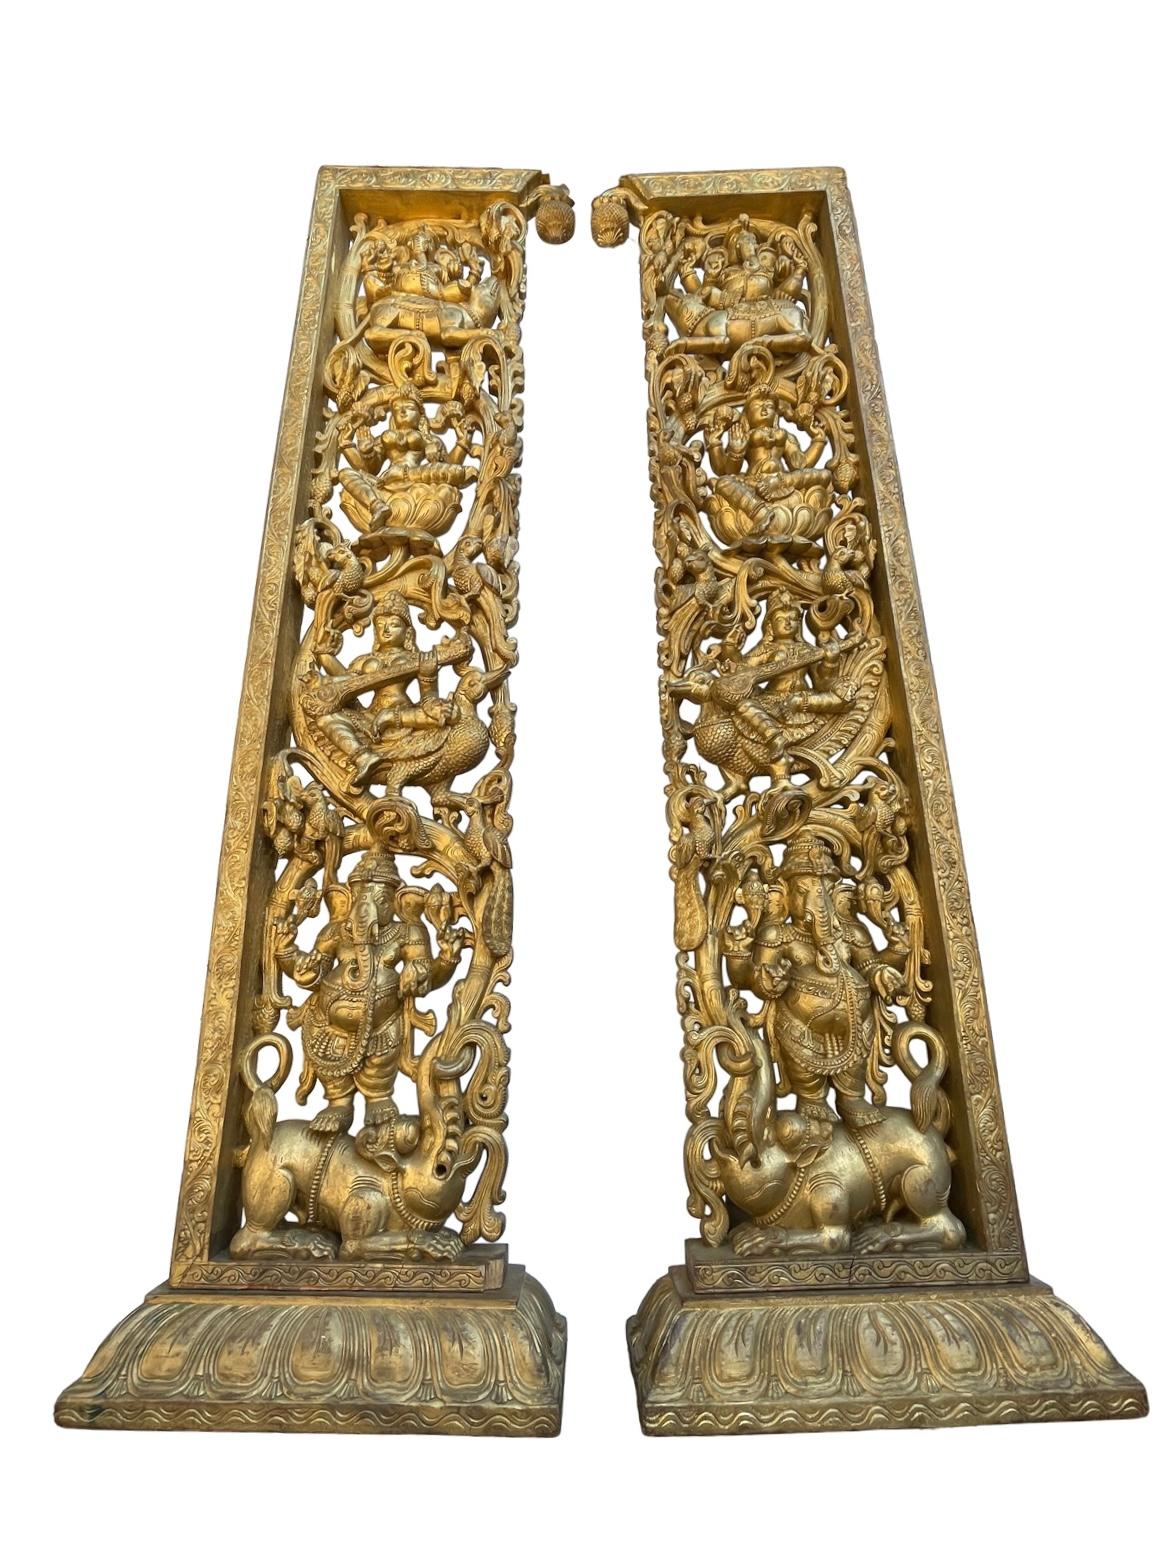 Chinoiserie Vintage Gilded Ganesha Carved Room Divider Doorway-A Pair For Sale